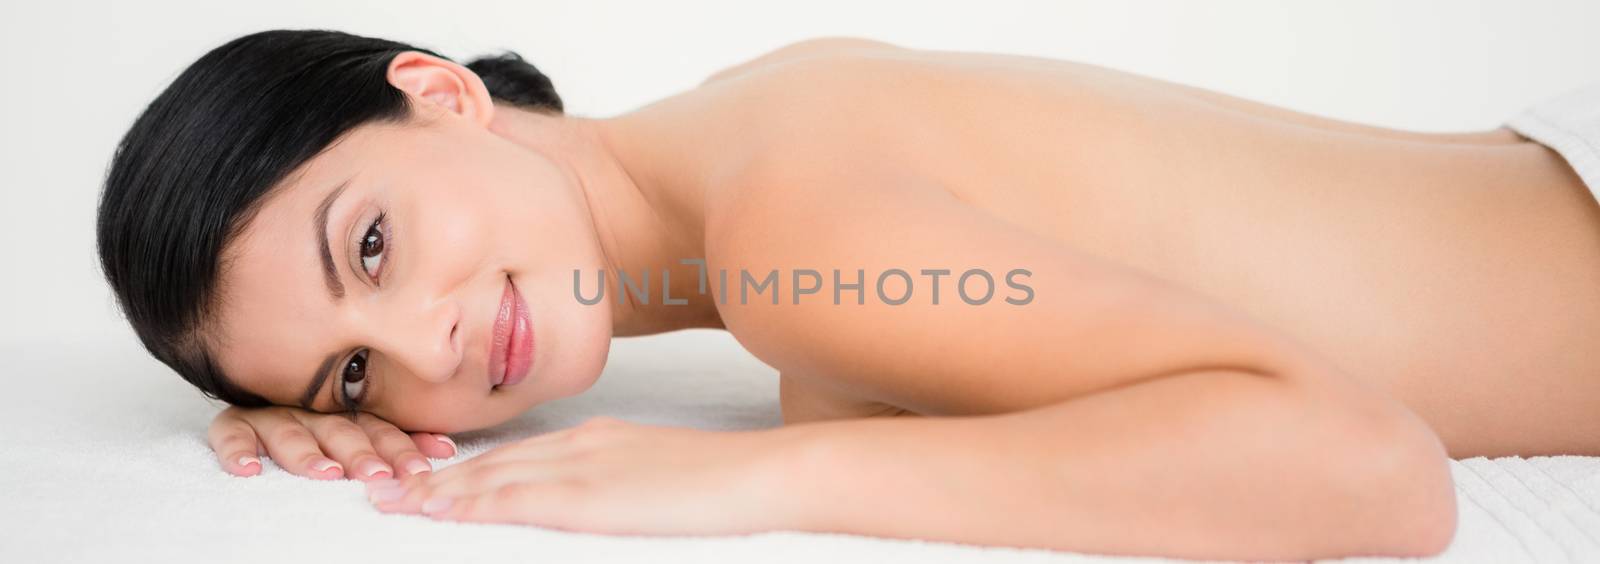 Pretty brunette enjoying a massage at camera at the health spa